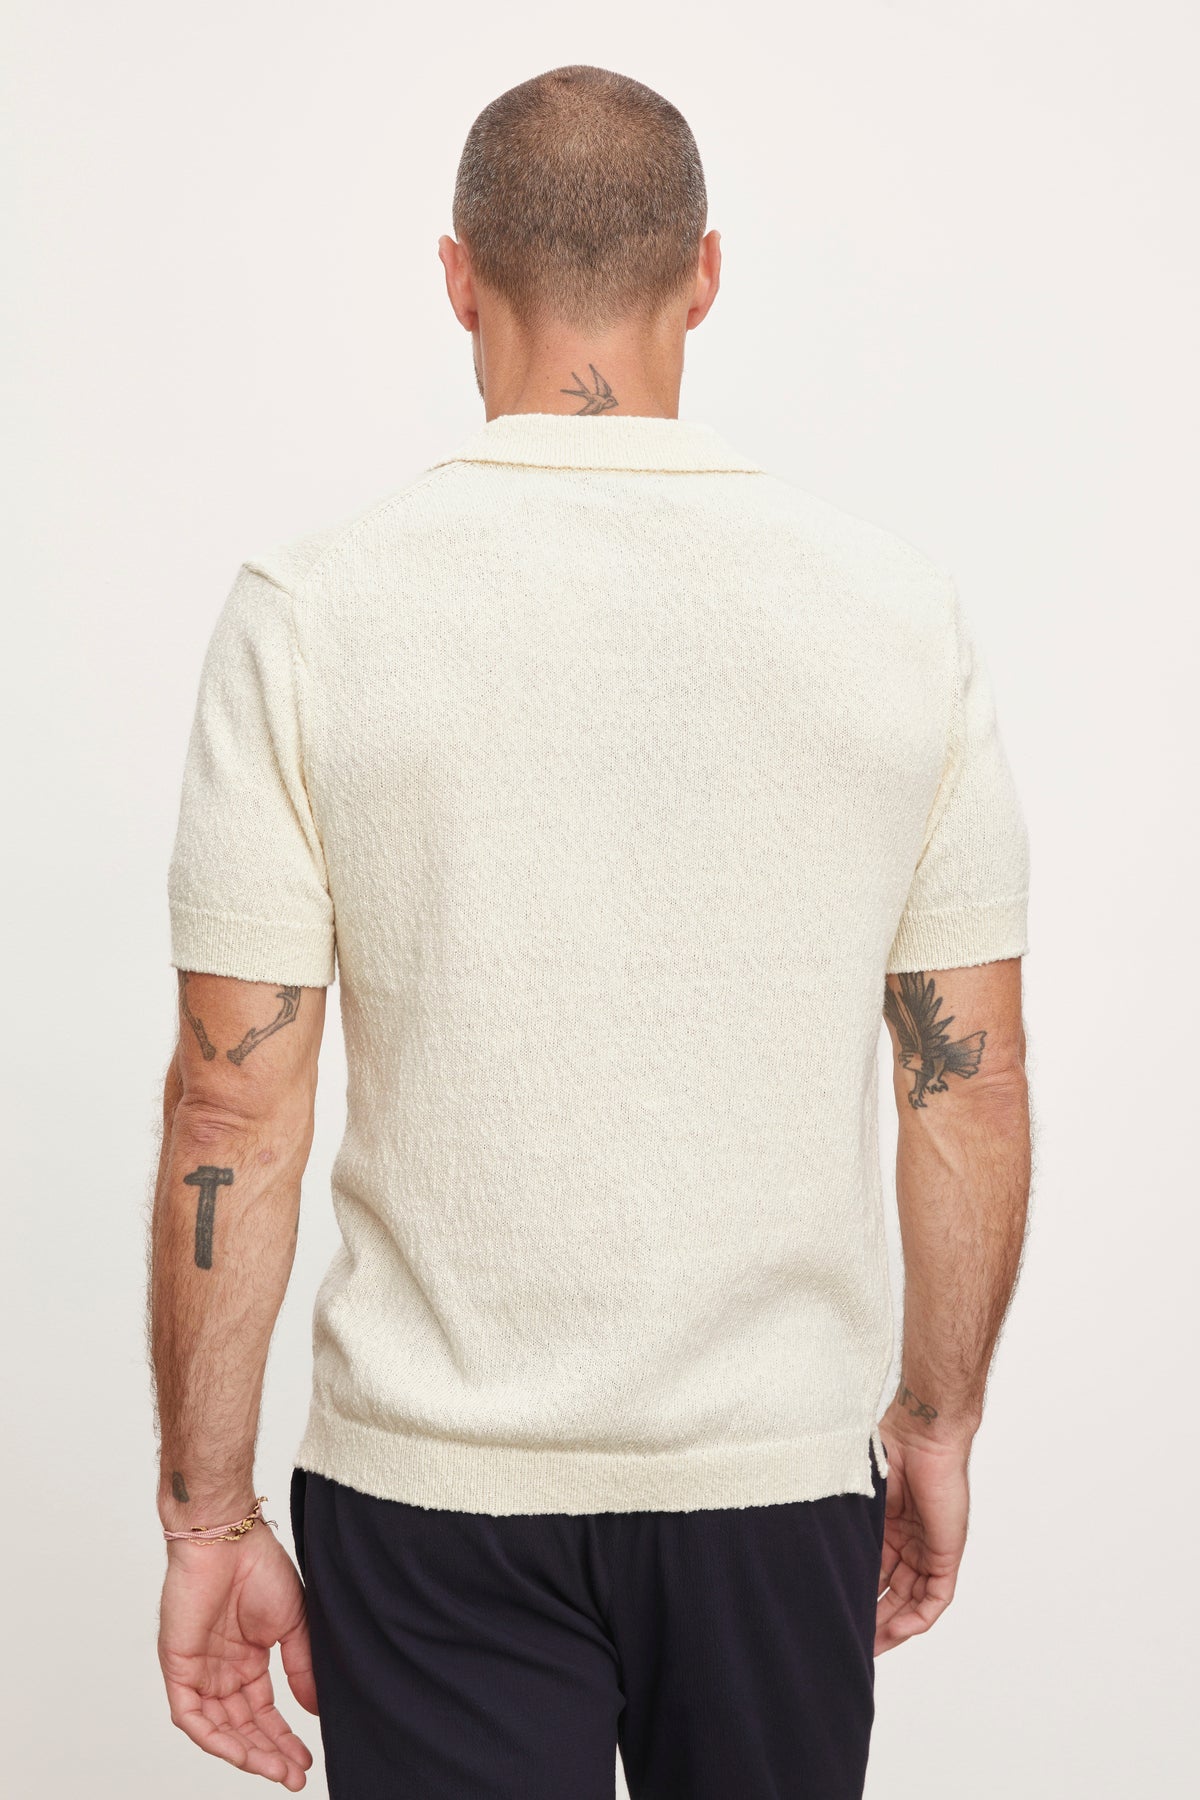   Rear view of a man with tattoos standing, wearing a Velvet by Graham & Spencer TIBERIUS POLO shirt and dark pants. 